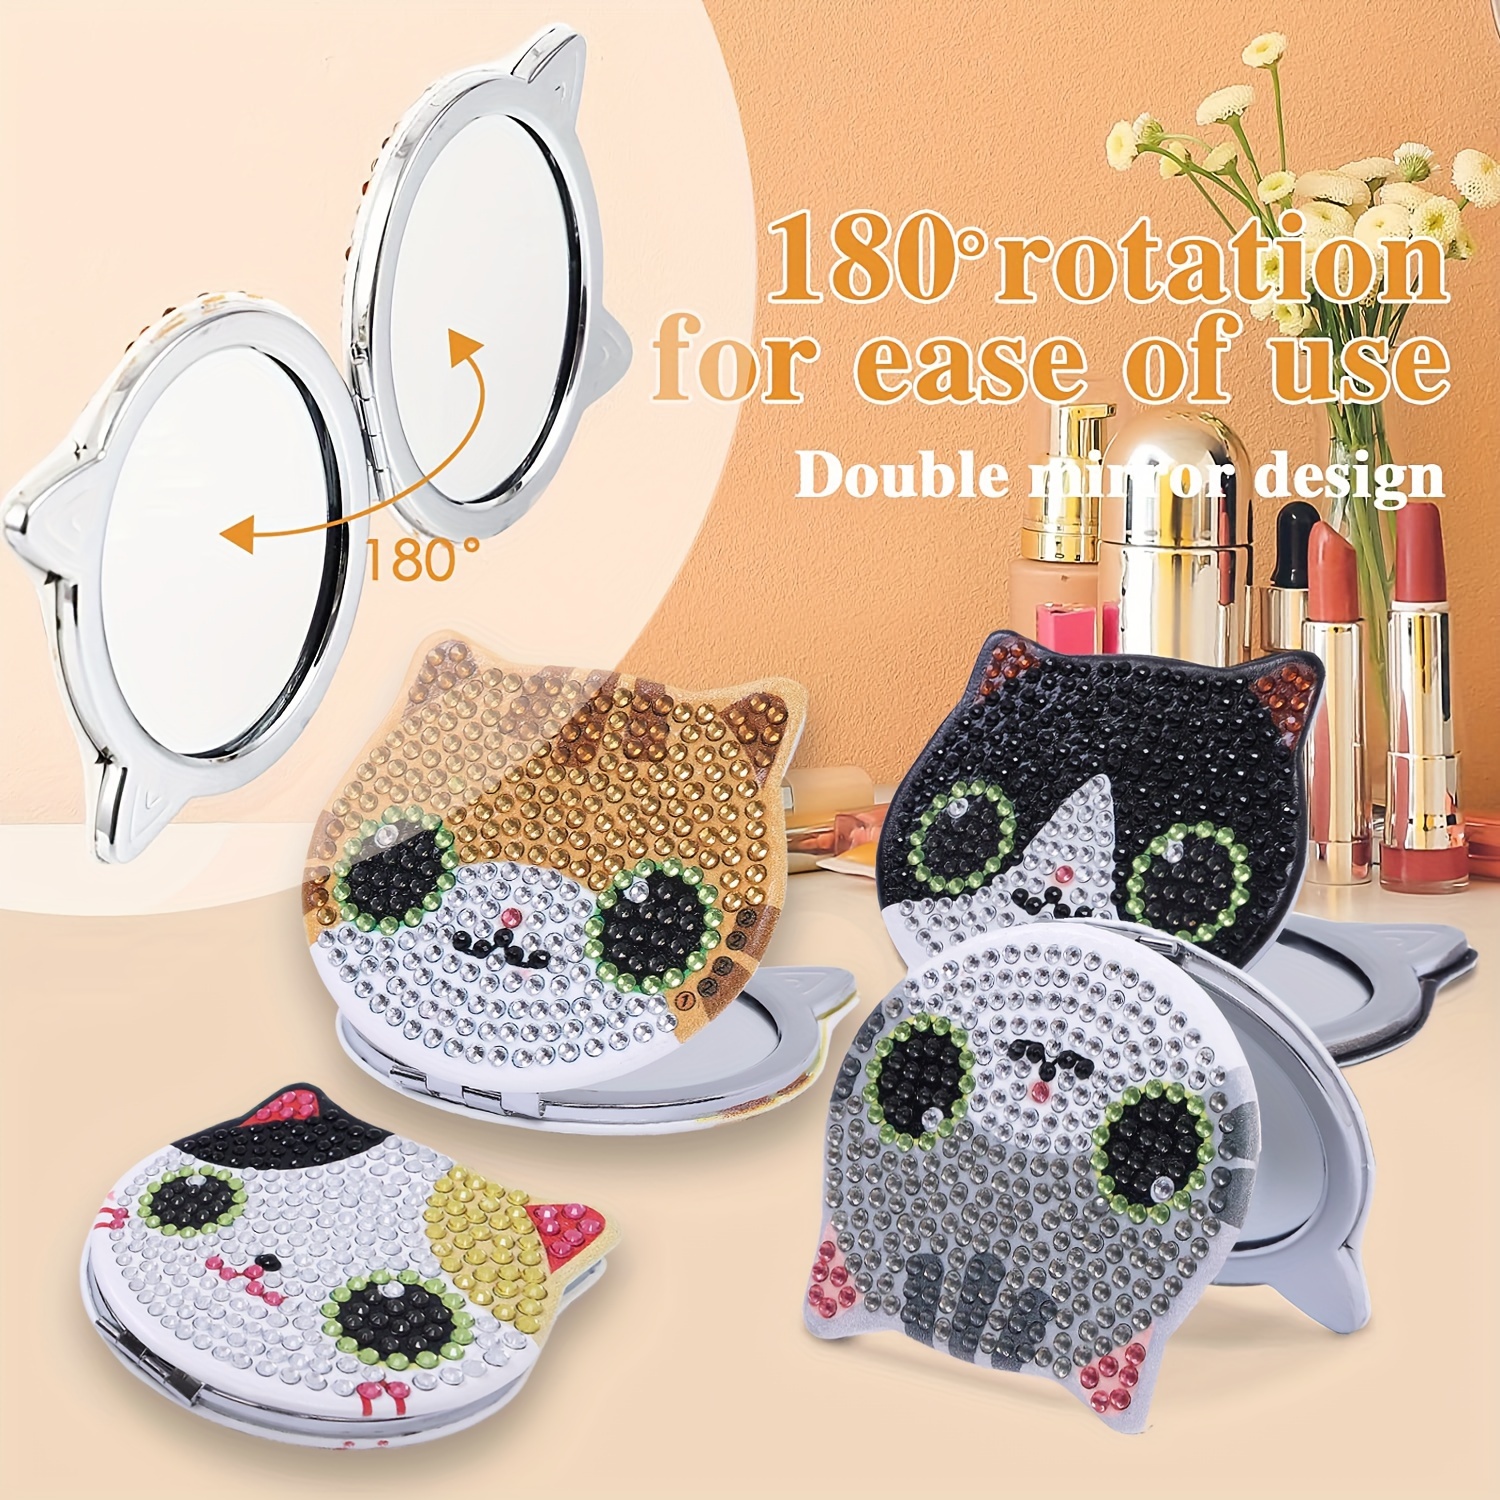 1pc Mini Diamond Painting Mirror With Cute Cat Pattern, Diy Special Shaped  Artware For Beginners As Christmas Gift